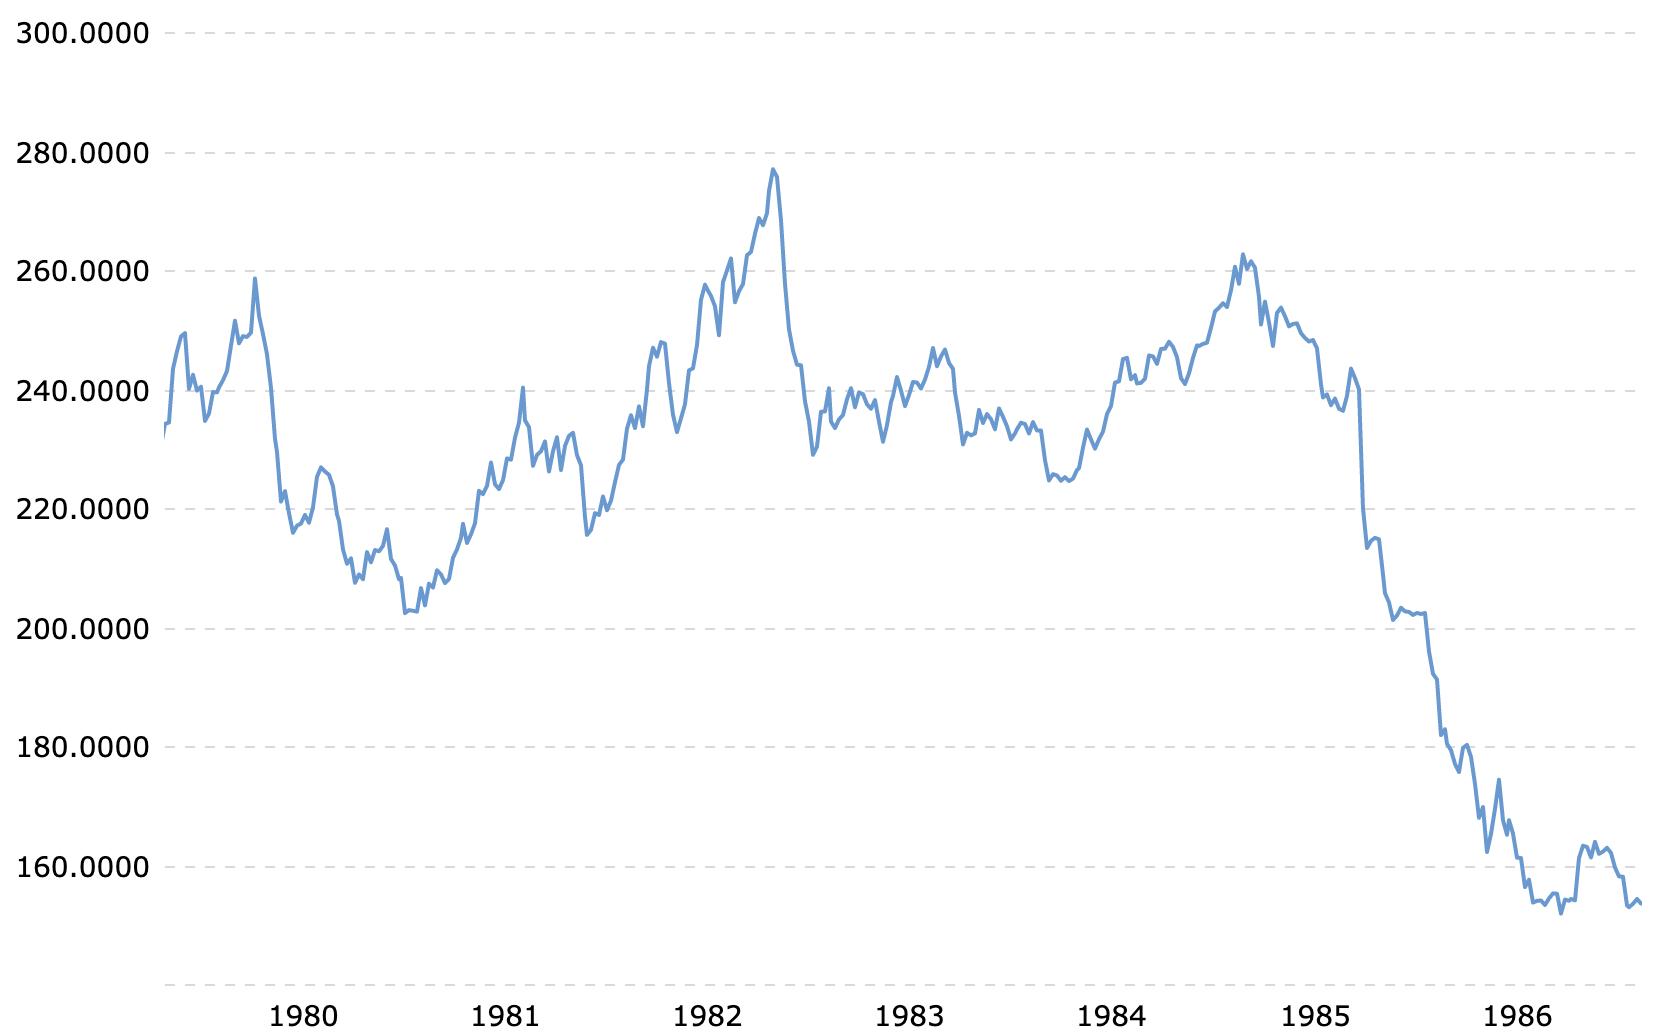 Significant depreciation of the JPY against the USD in the mid-1980s. Source: Macrotrends